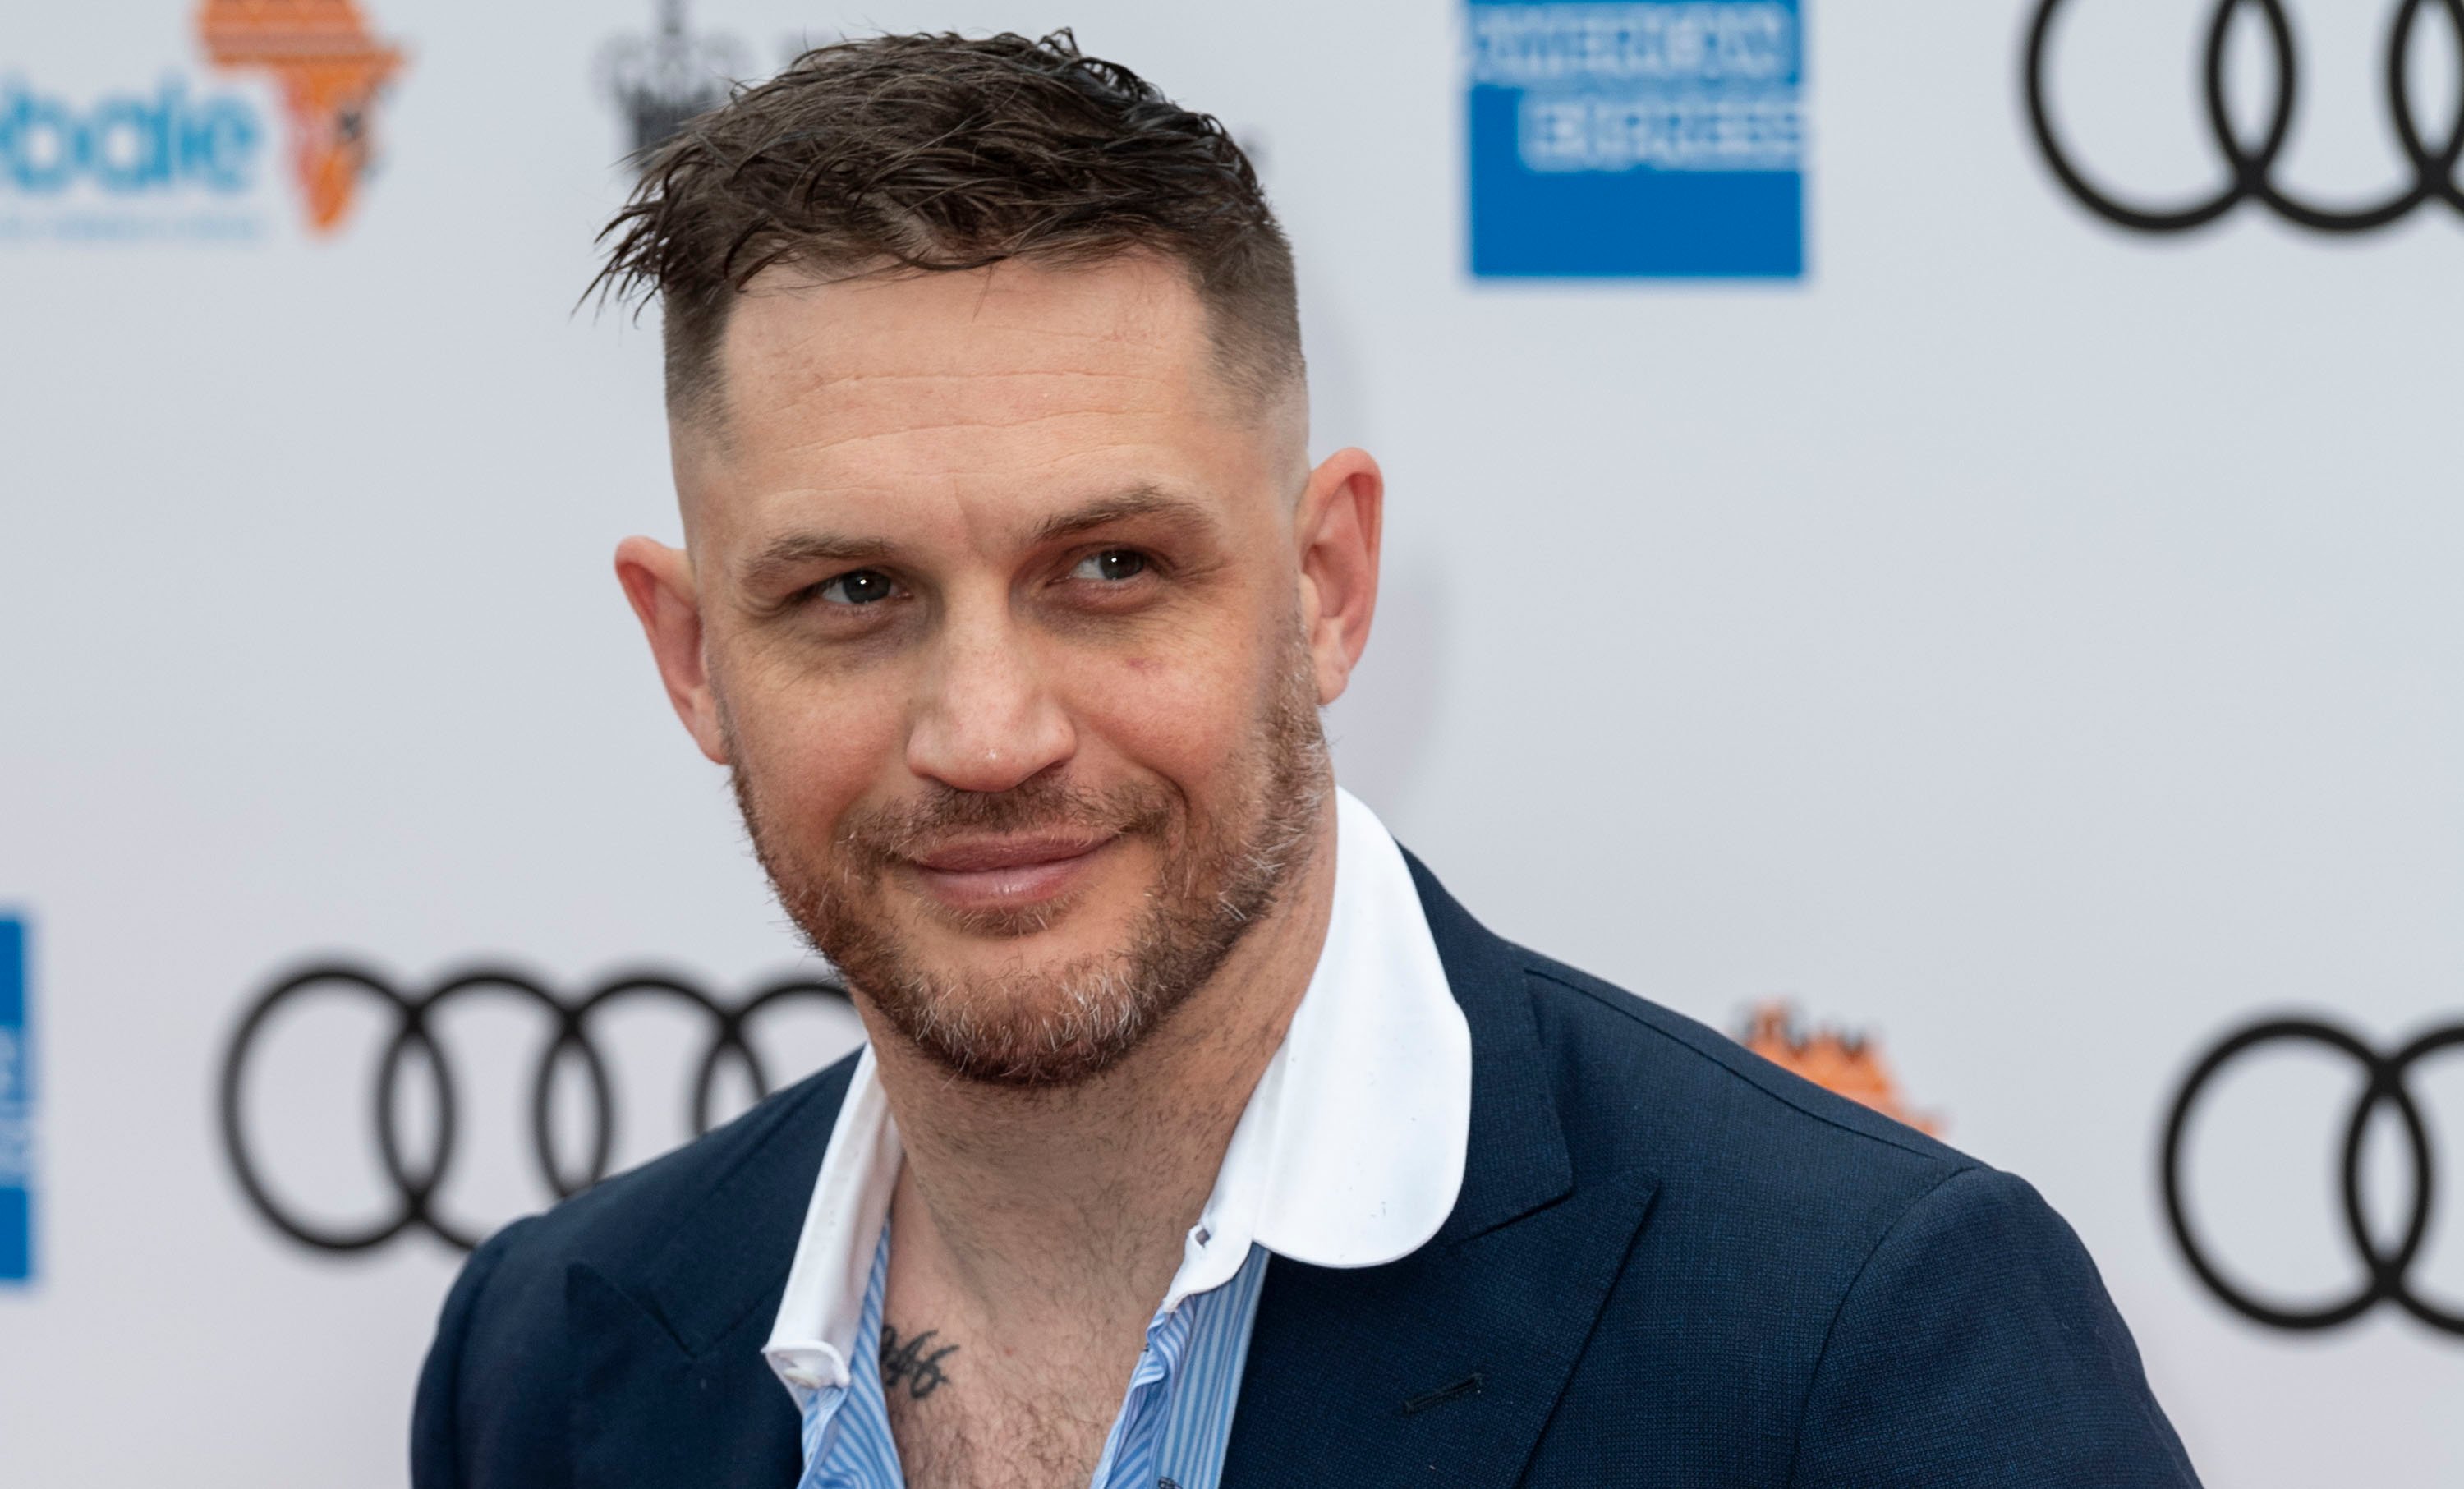 Tom Hardy smiles for a photo at the Sentebale Audi Concert at Hampton Court Palace